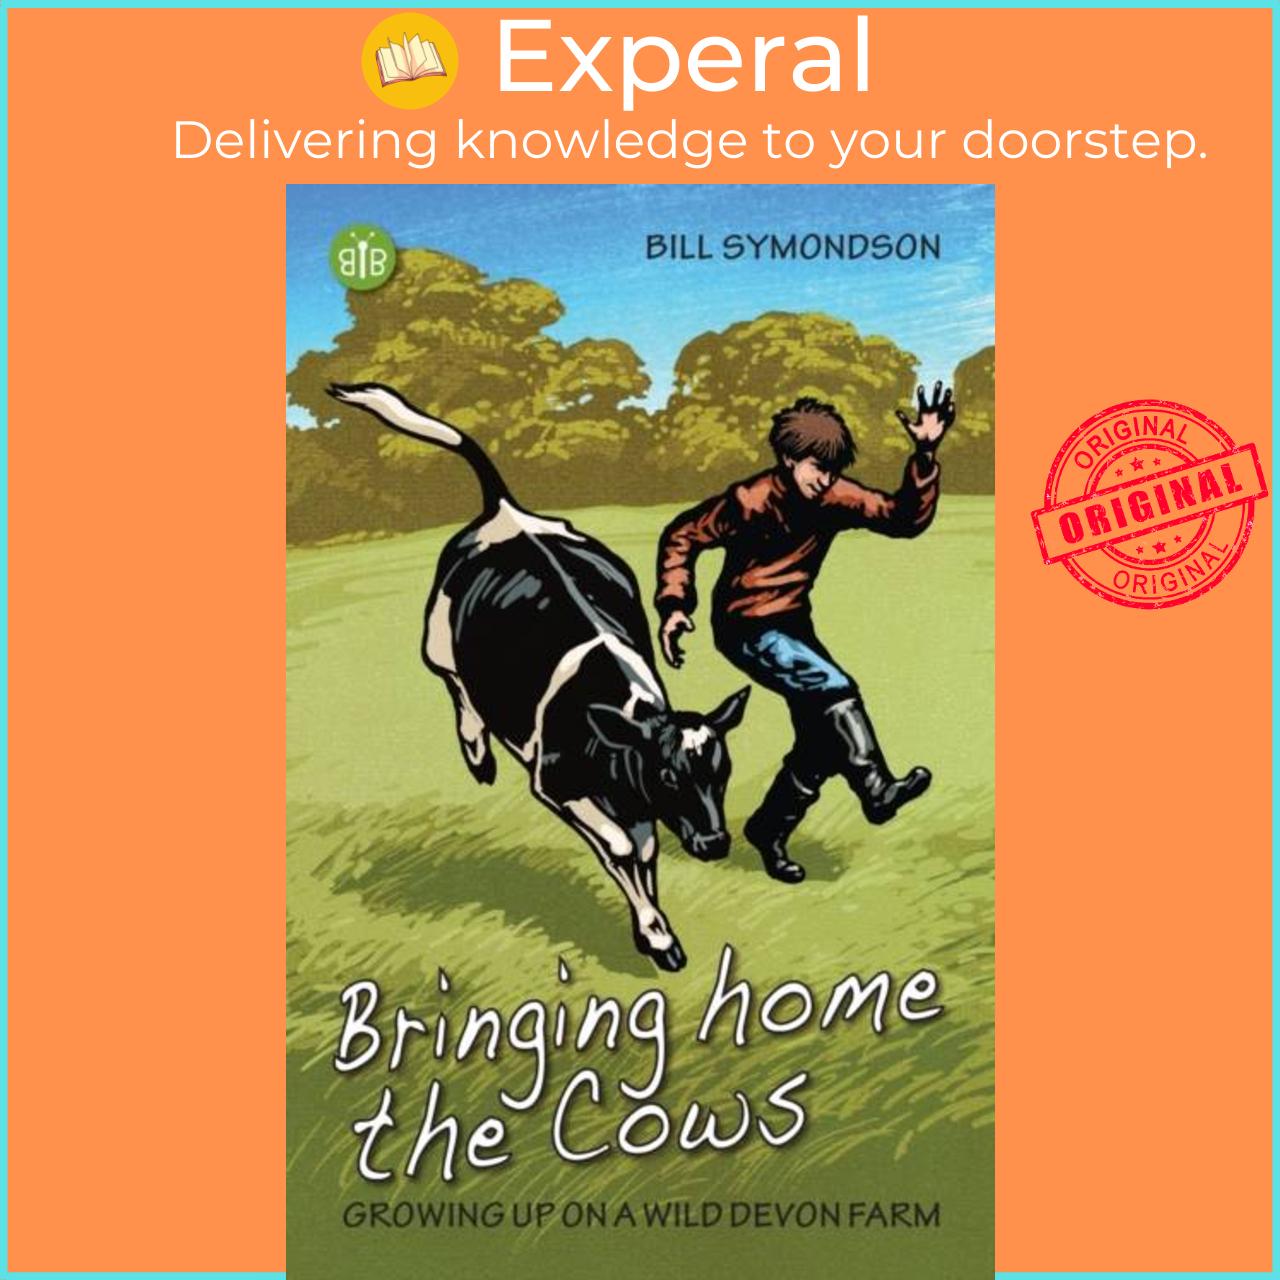 Sách - Bringing Home the Cows - Growing up on a wild Devon farm by Bill Symondson (UK edition, paperback)